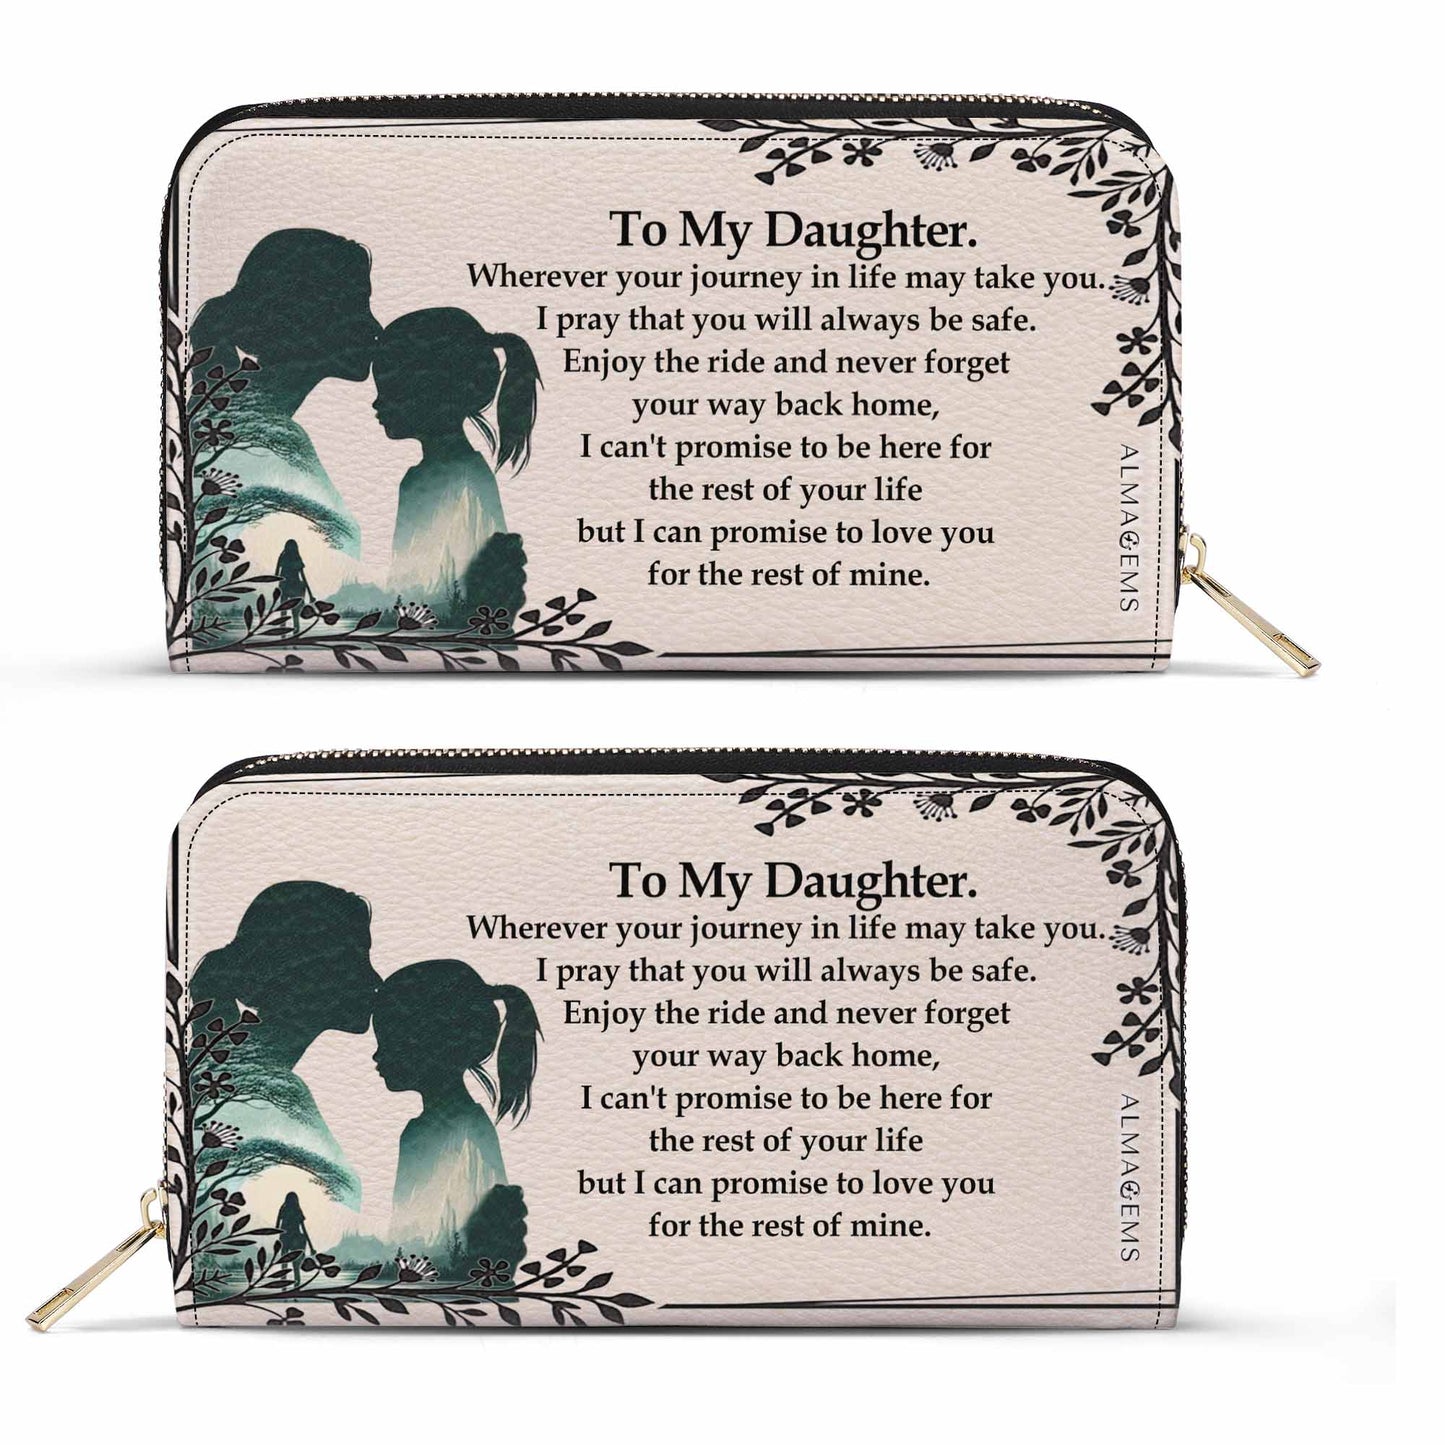 To My Daughter - Women Leather Wallet - WW10